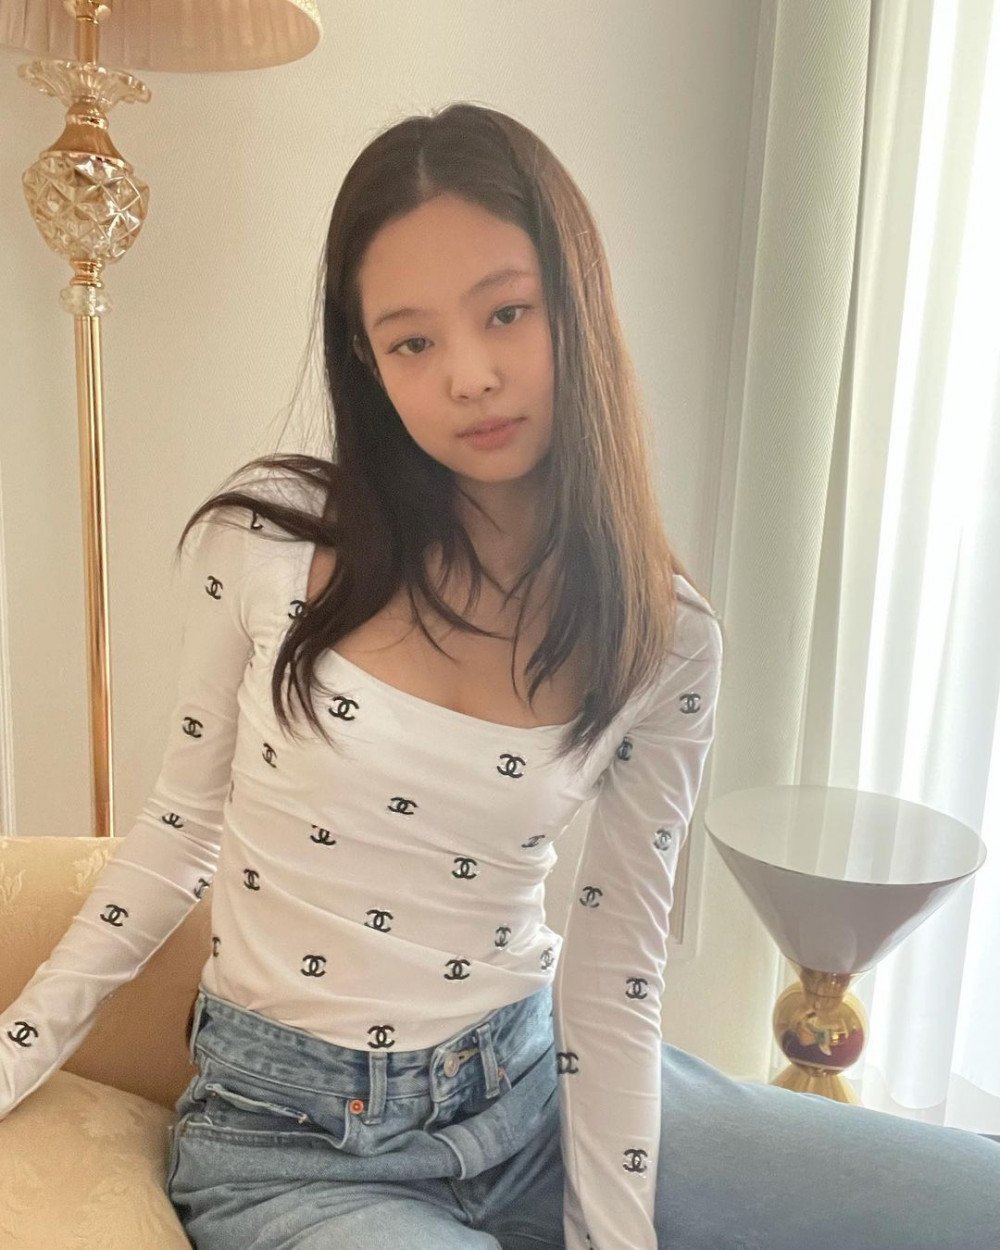 BLACKPINK's Jennie shows off her splended beauty wearing a simple